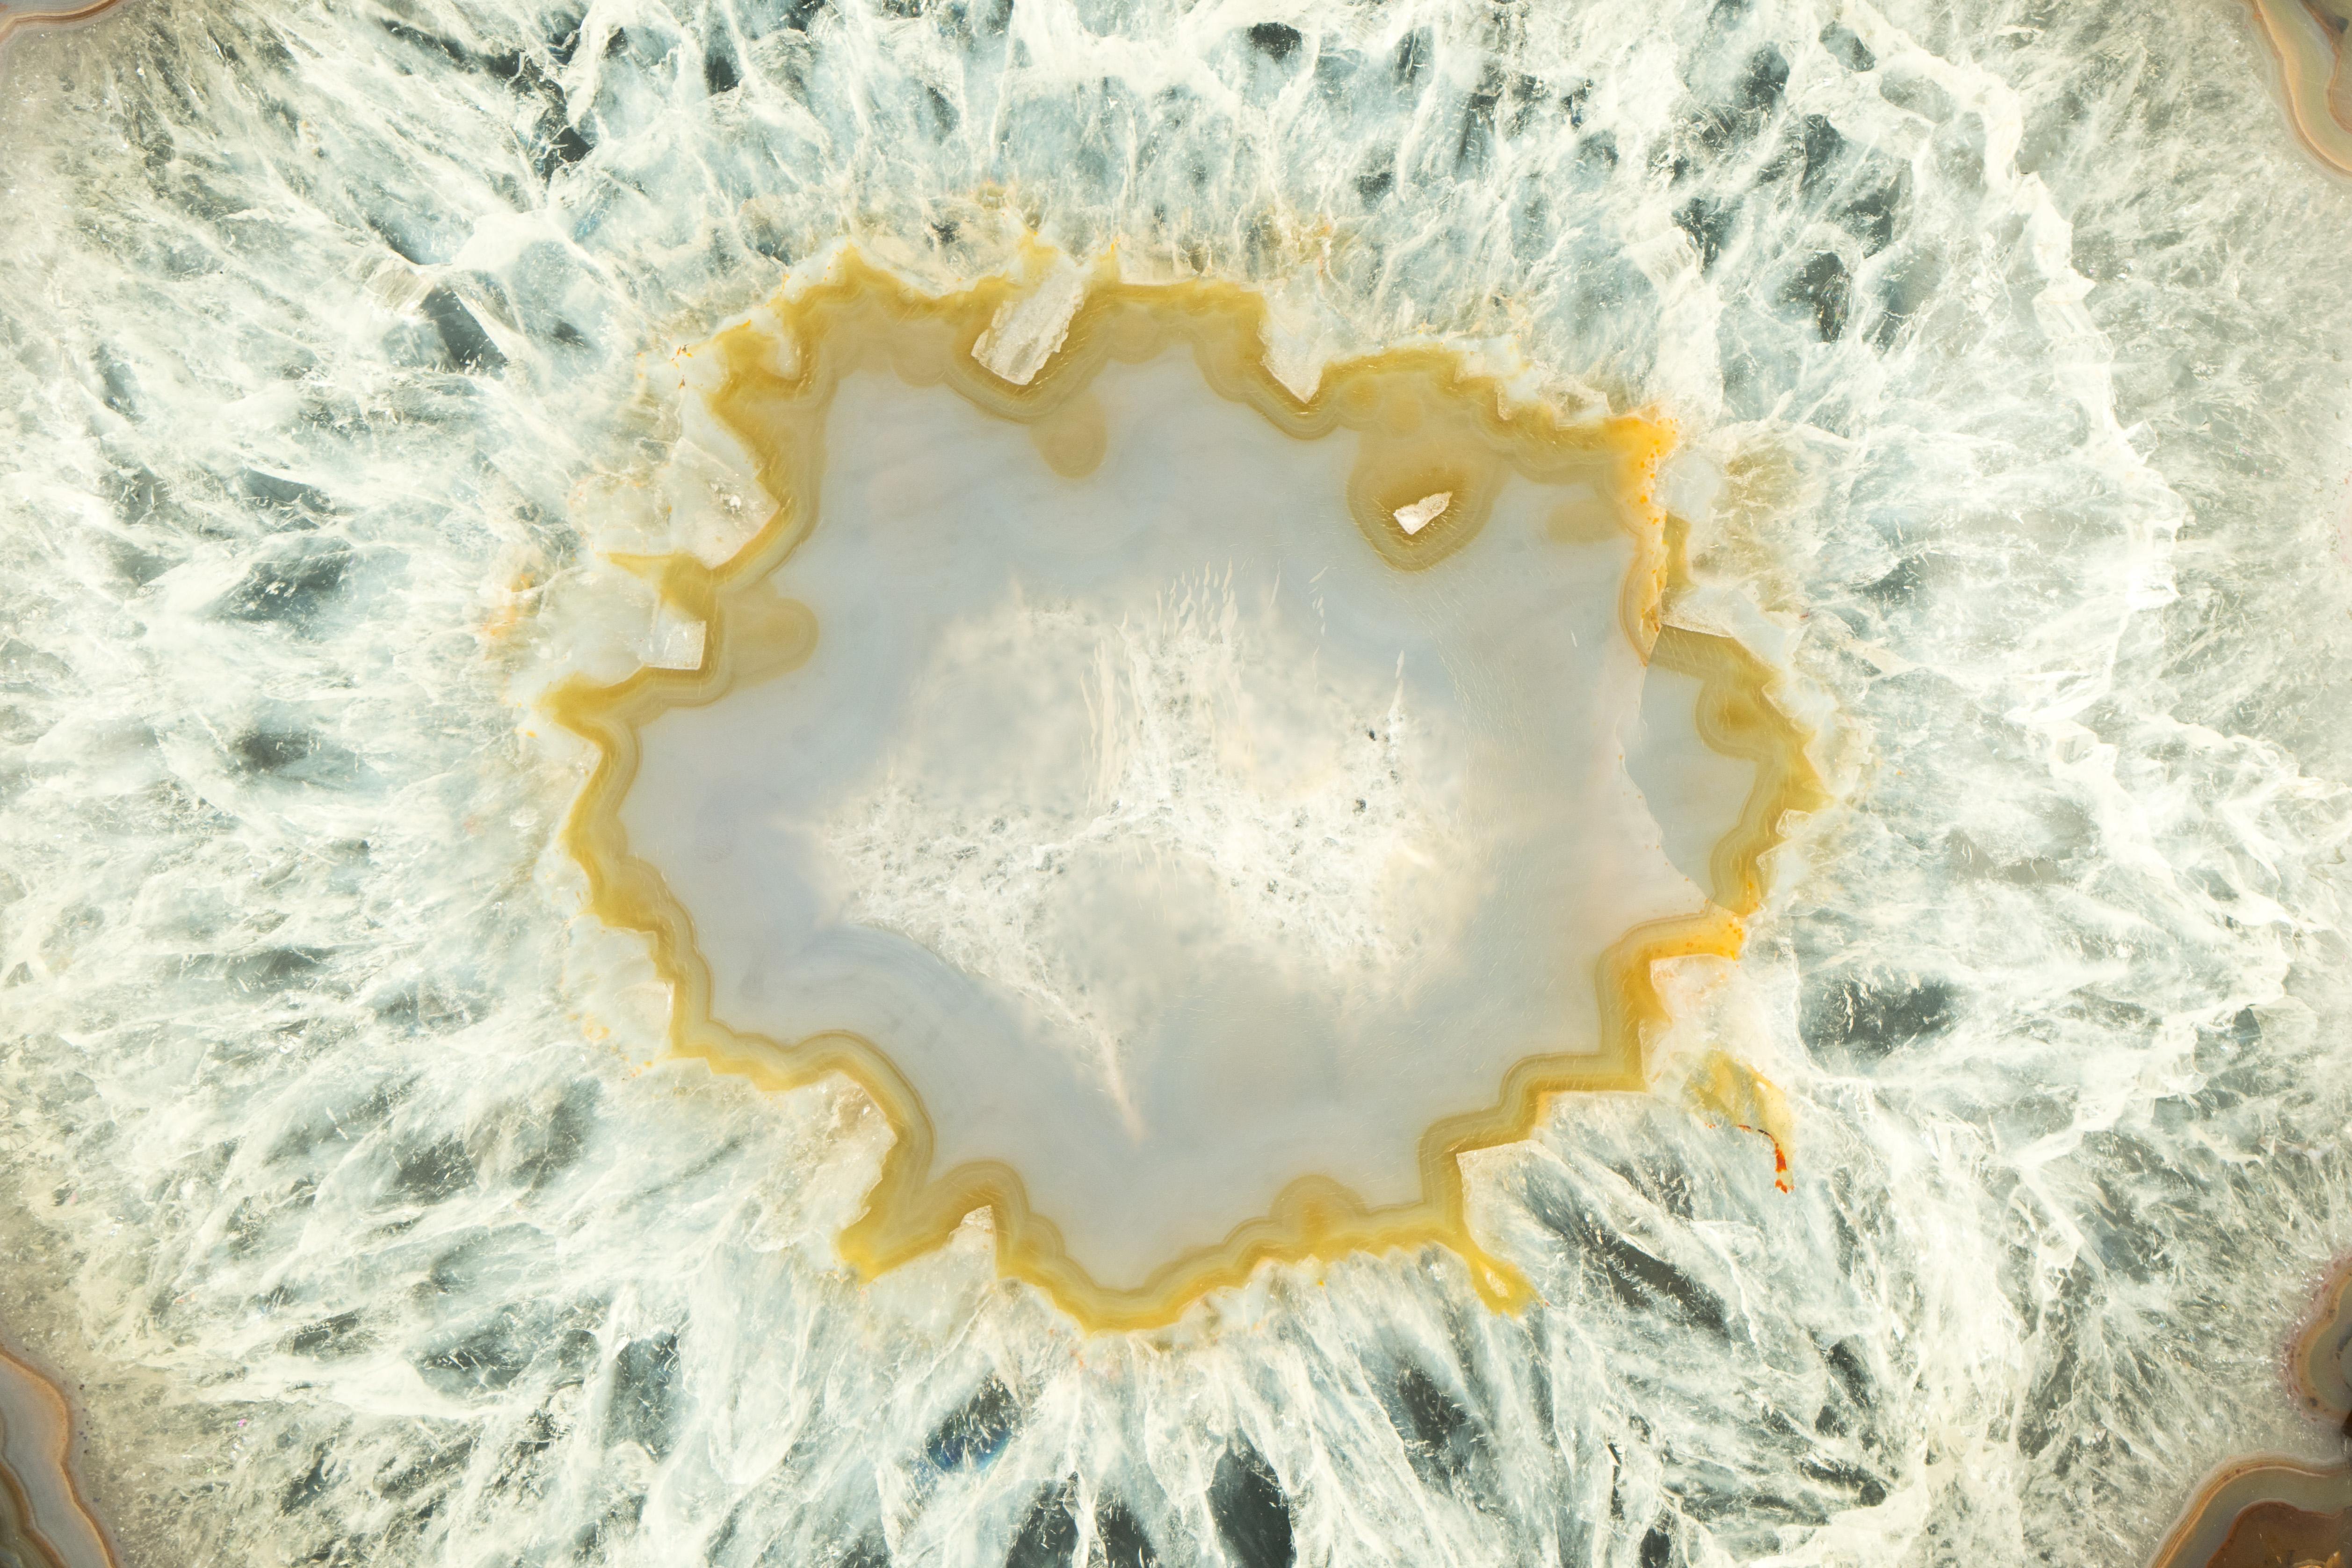 Gallery Grade Large Lace Agate Slice, with Ice-Like Crystal and Colorful Agate 15